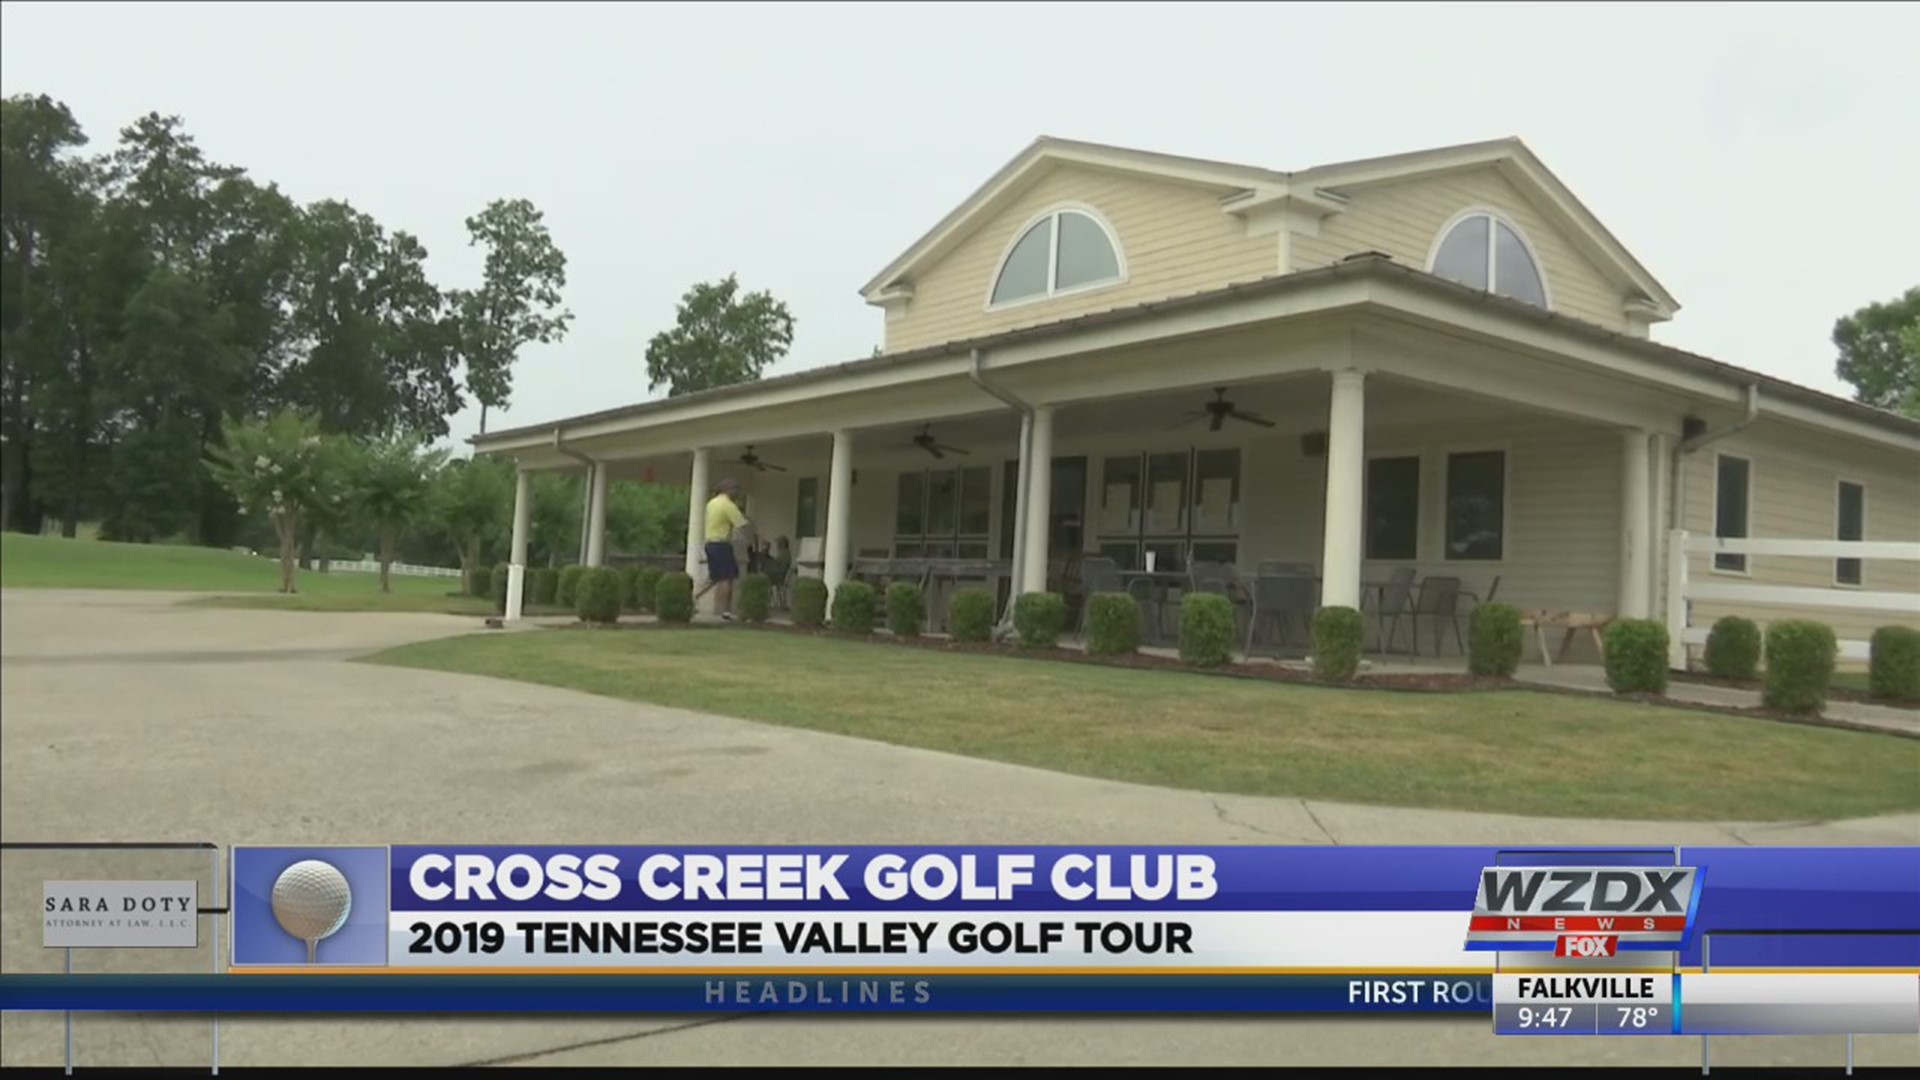 The Cross Creek Golf Course in Cullman is rated one of the best municipal courses in Alabama by several golf magazines and tonight it's featured in our 2019 Tennessee Valley Golf Tour.